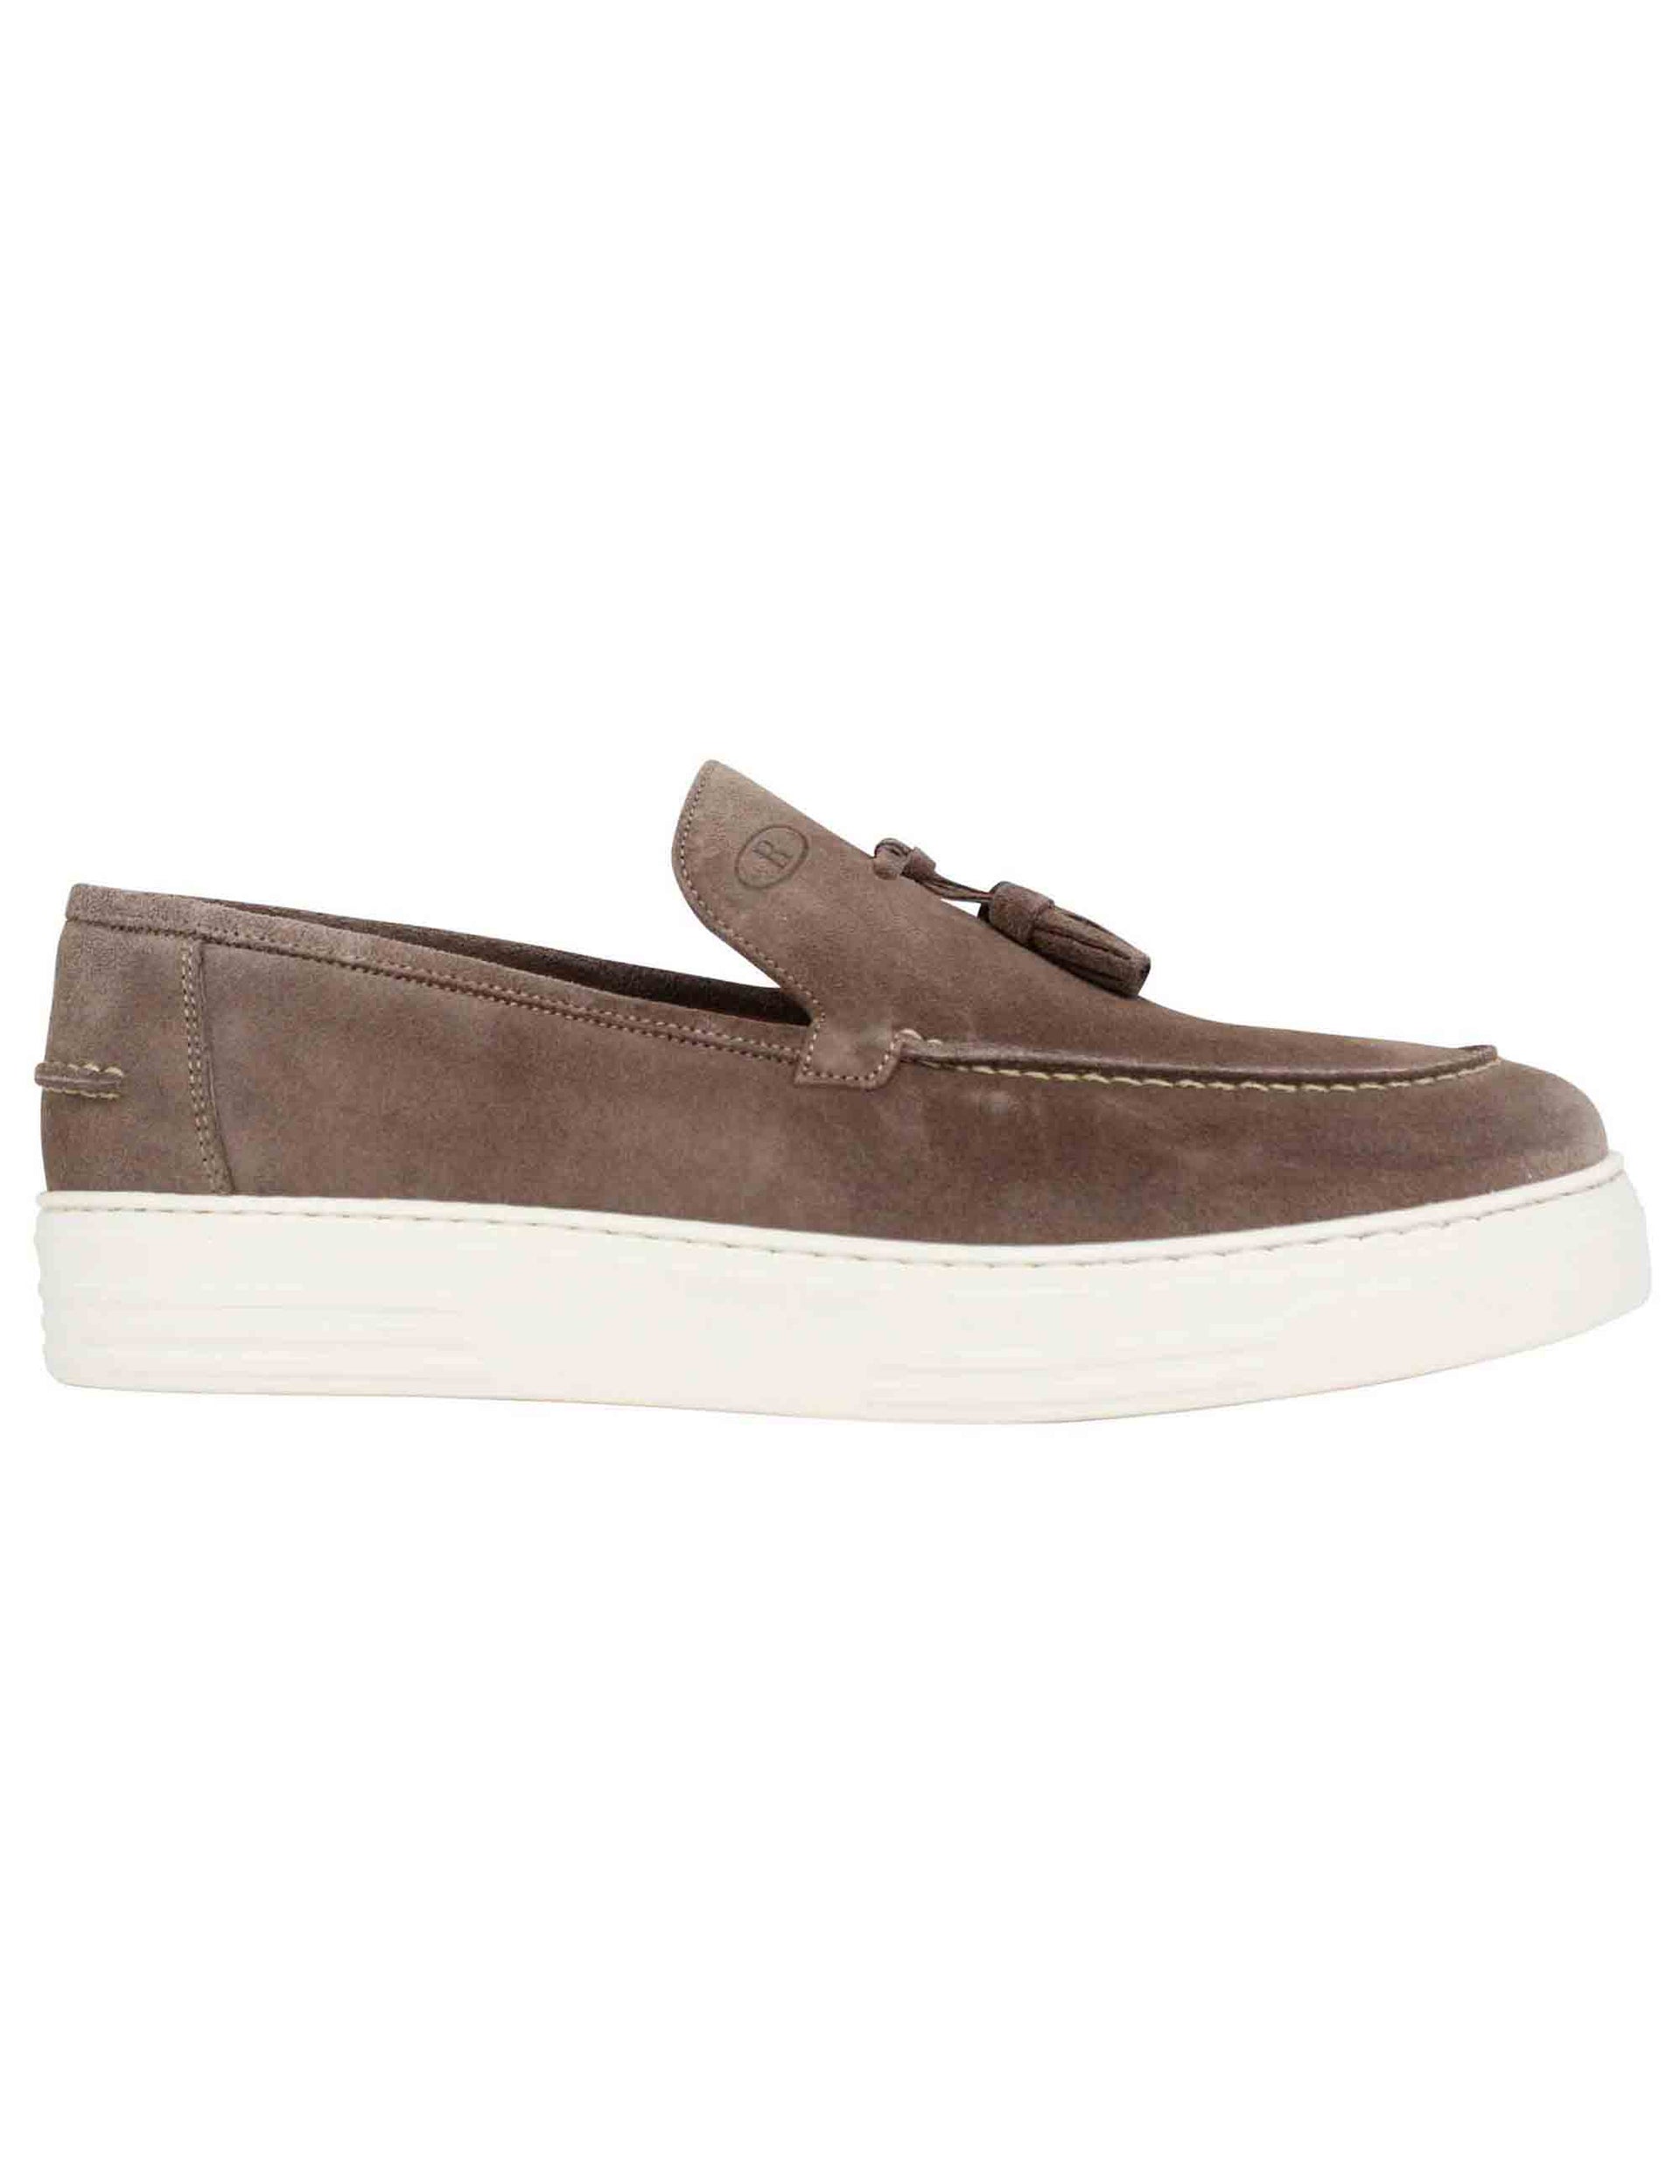 Men's moccasins in taupe suede with rubber sole